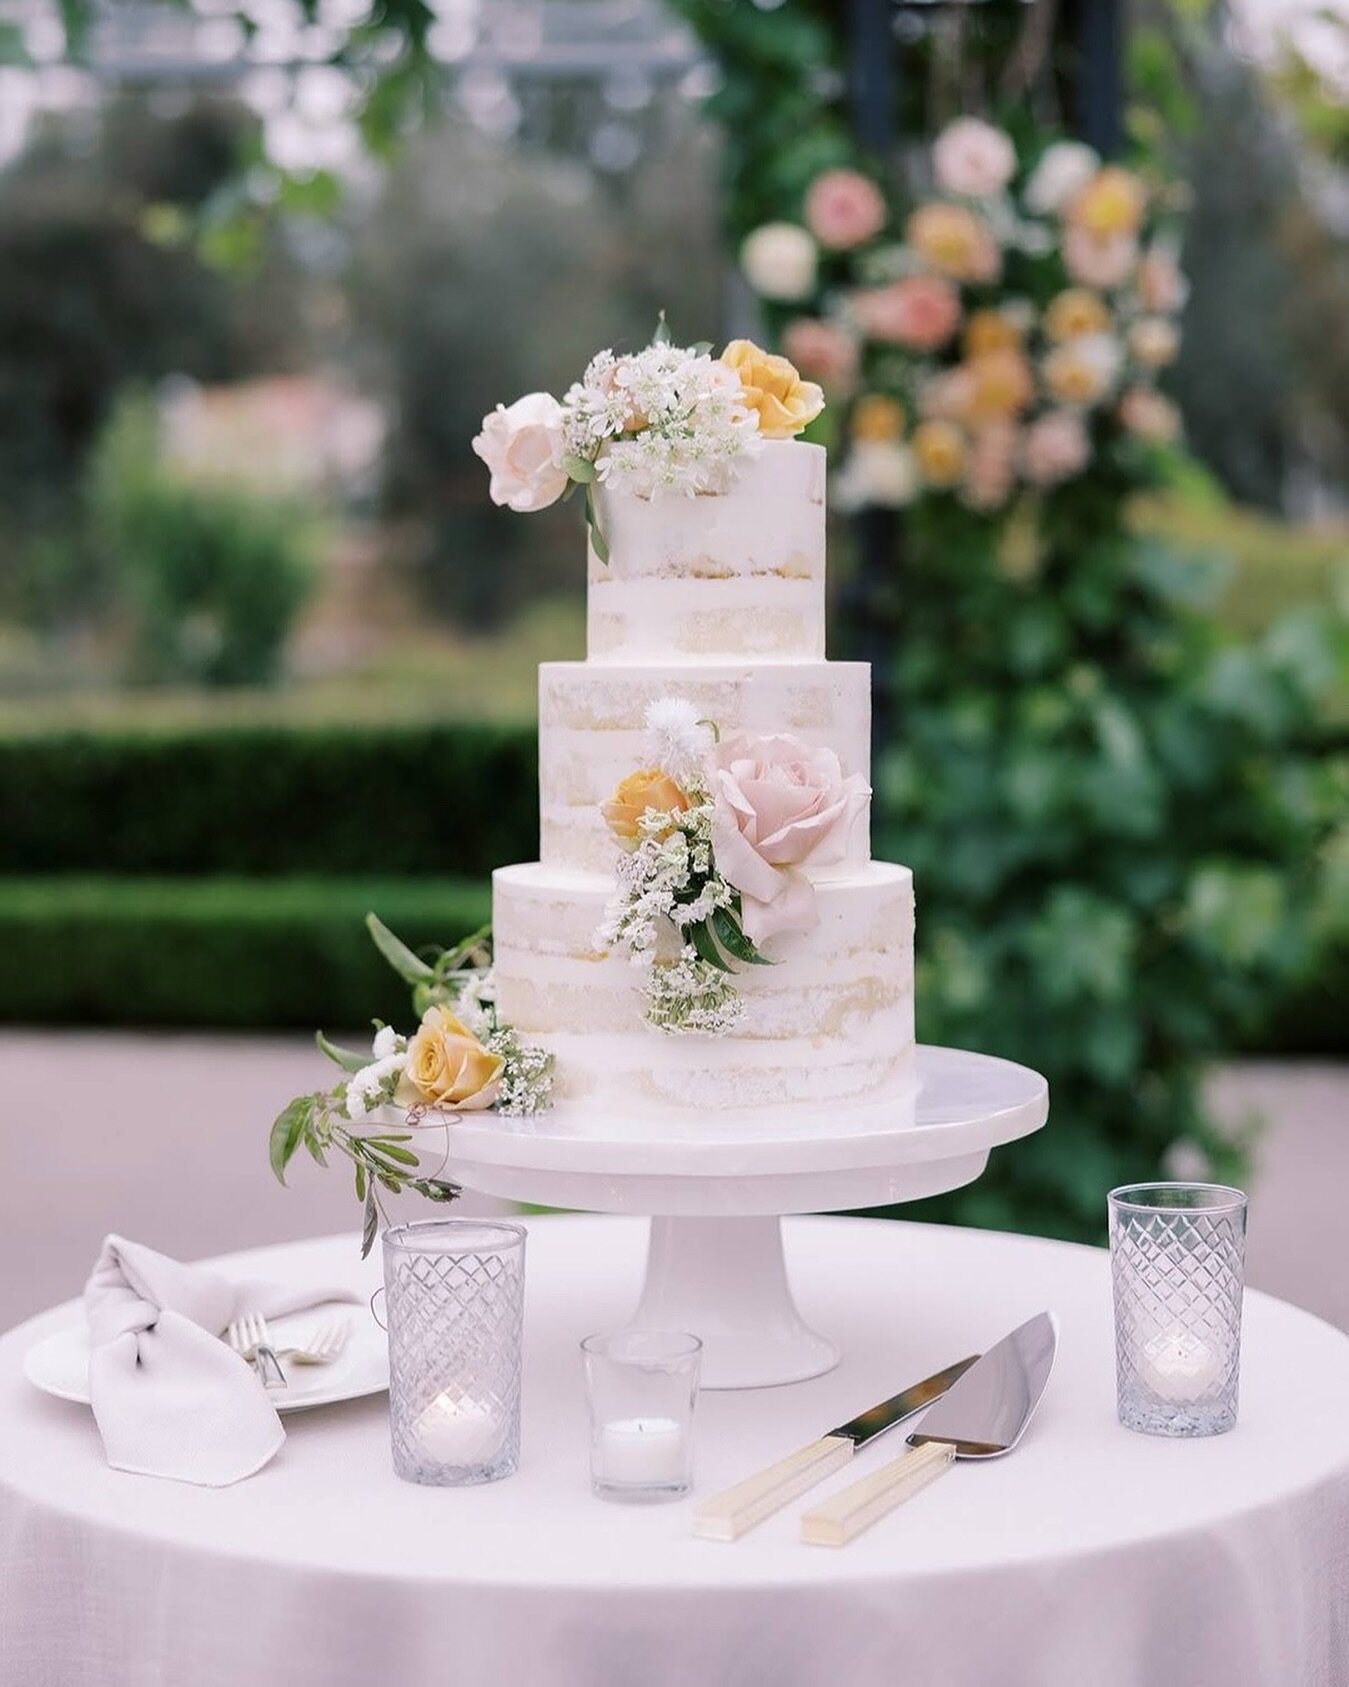 To have a cake or not to have a cake? So many of our couples find alternative ways to offer their guests dessert, but there's something still so elegant about a simple wedding cake. What's your take? 
⠀⠀⠀⠀⠀⠀⠀⠀⠀
Planning+Design | @blissfullystyledeven